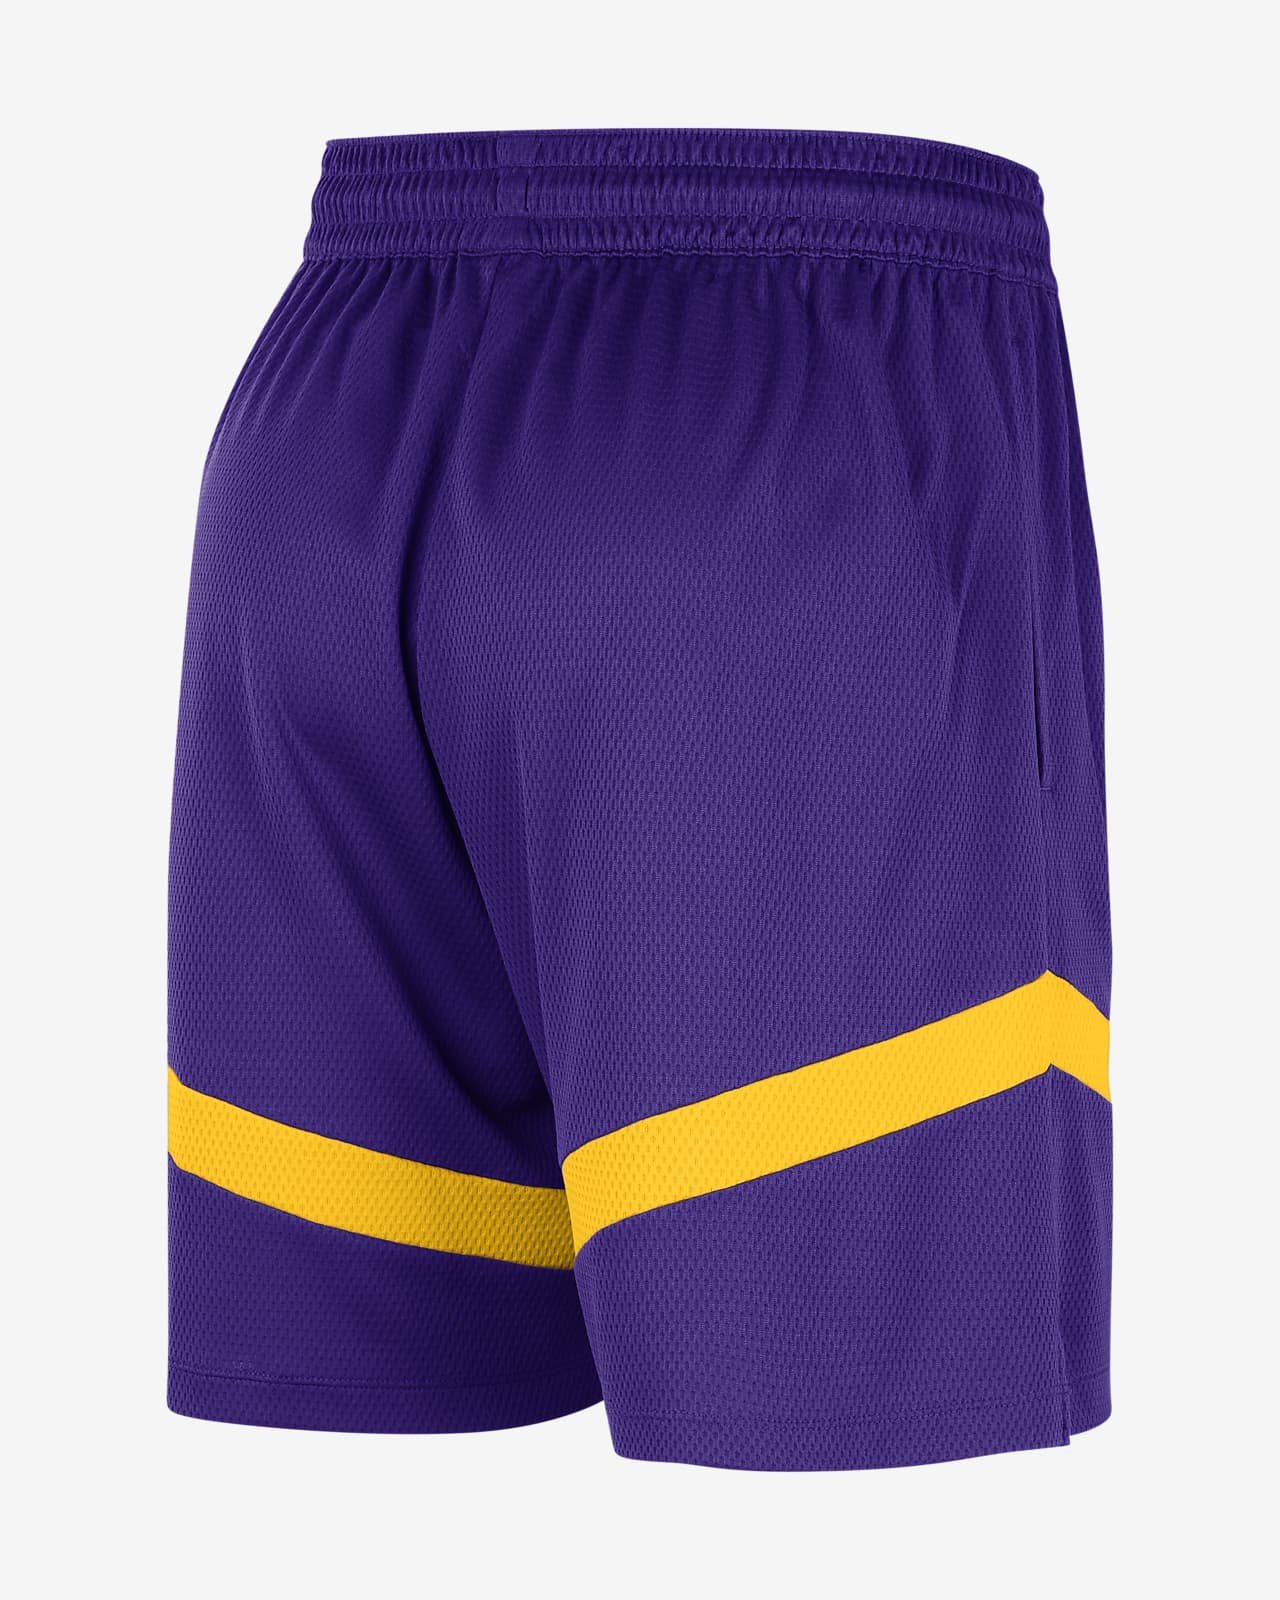 The Los Angeles Lakers Icon Edition Nike NBA Swingman Shorts are